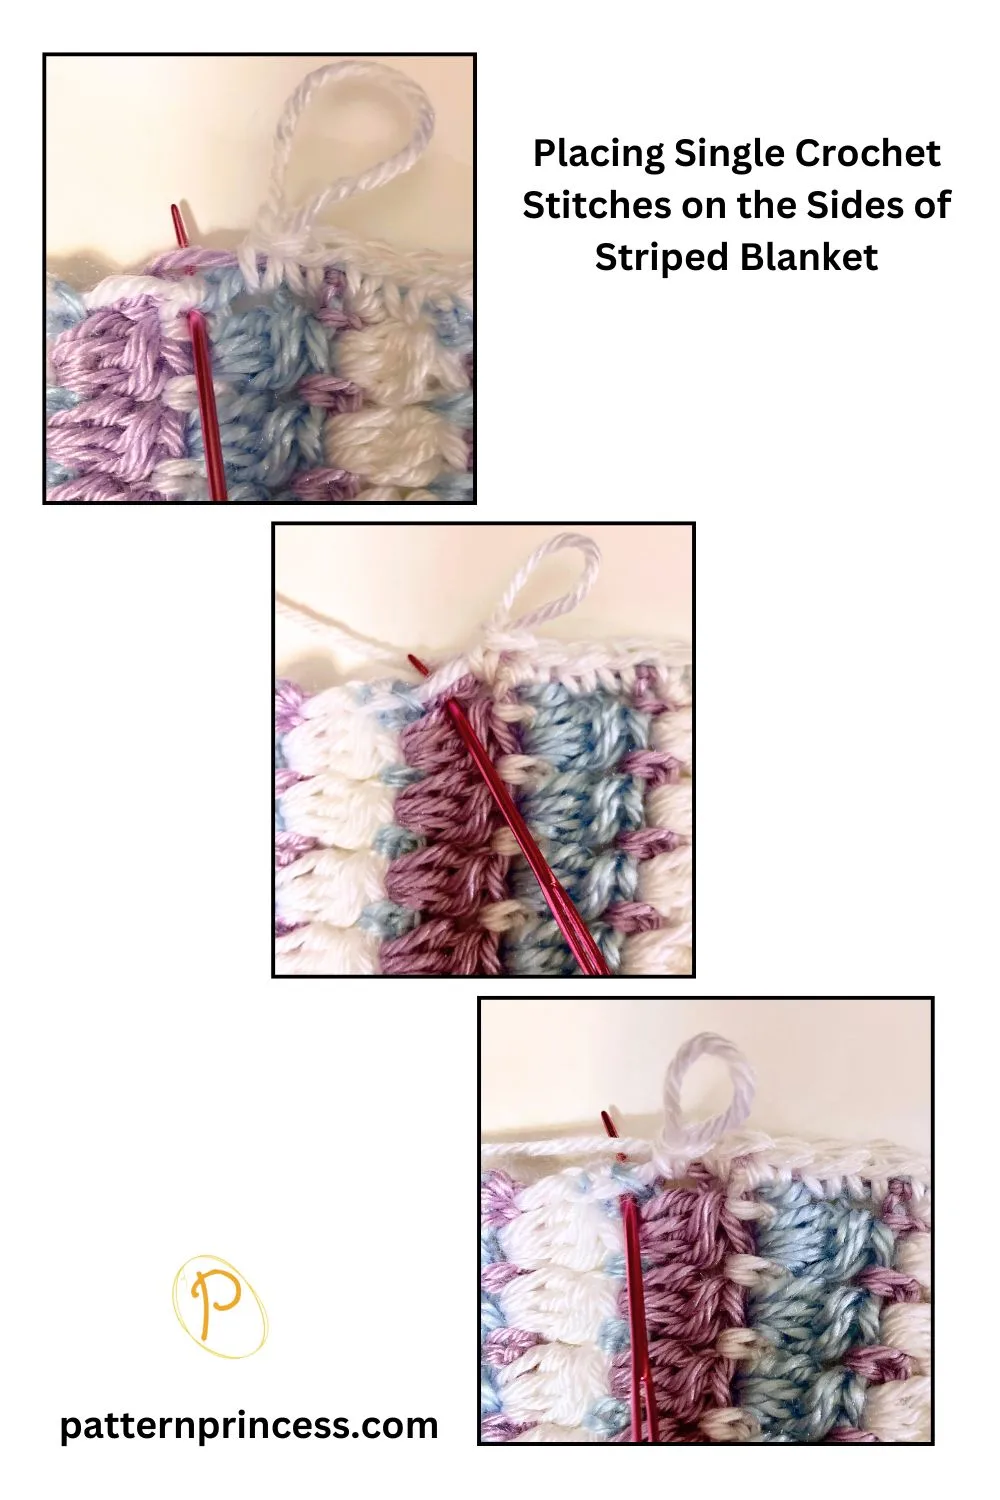 Placing Single Crochet Stitches on the Sides of Striped Blanket